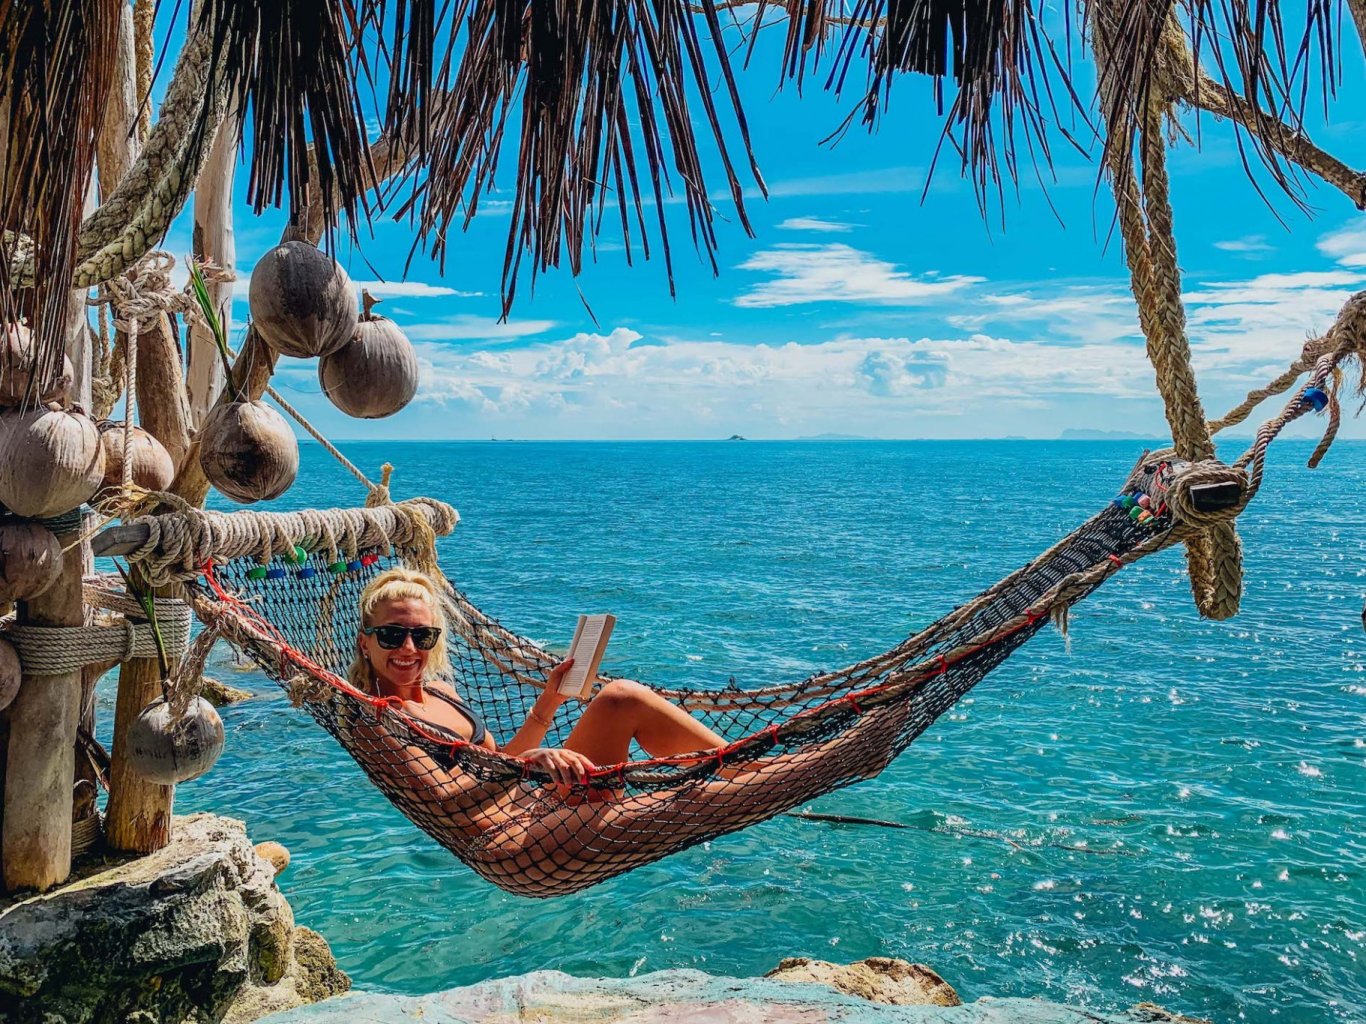 A picturesque photo of a girl on a hammock by crystal clear blue waters in Koh Phangan Thailand